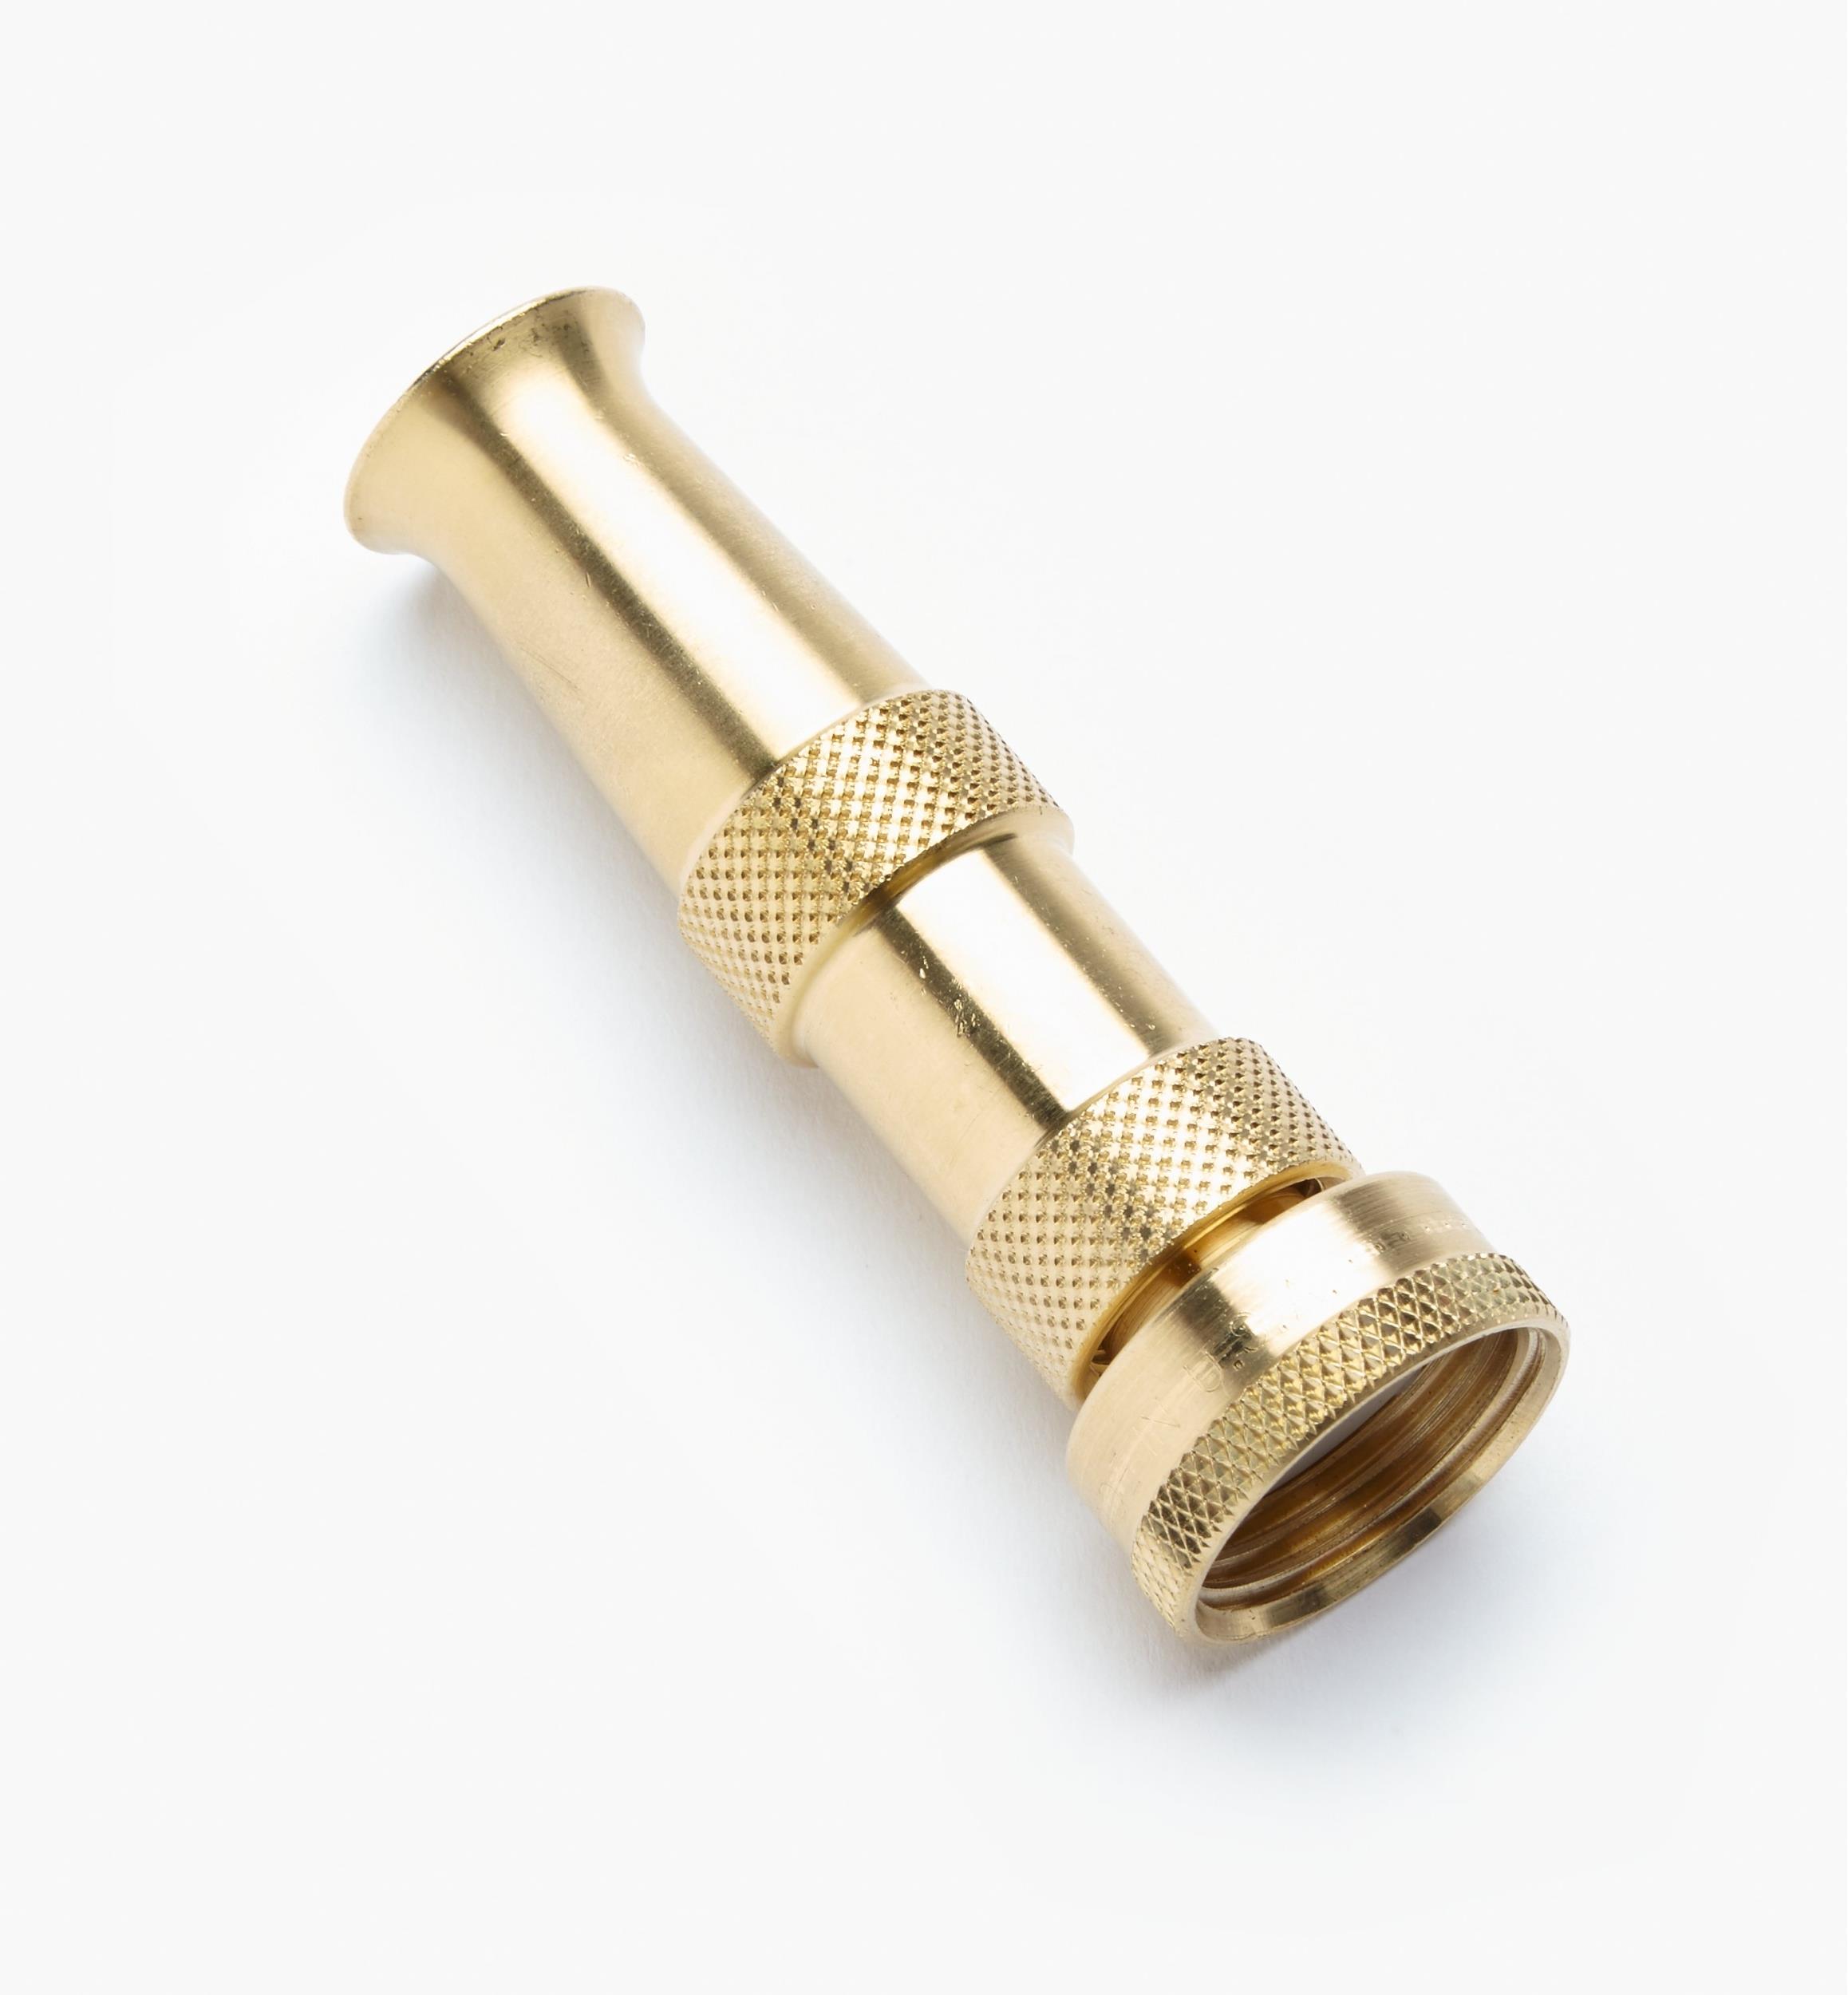 Brass Watering Nozzle